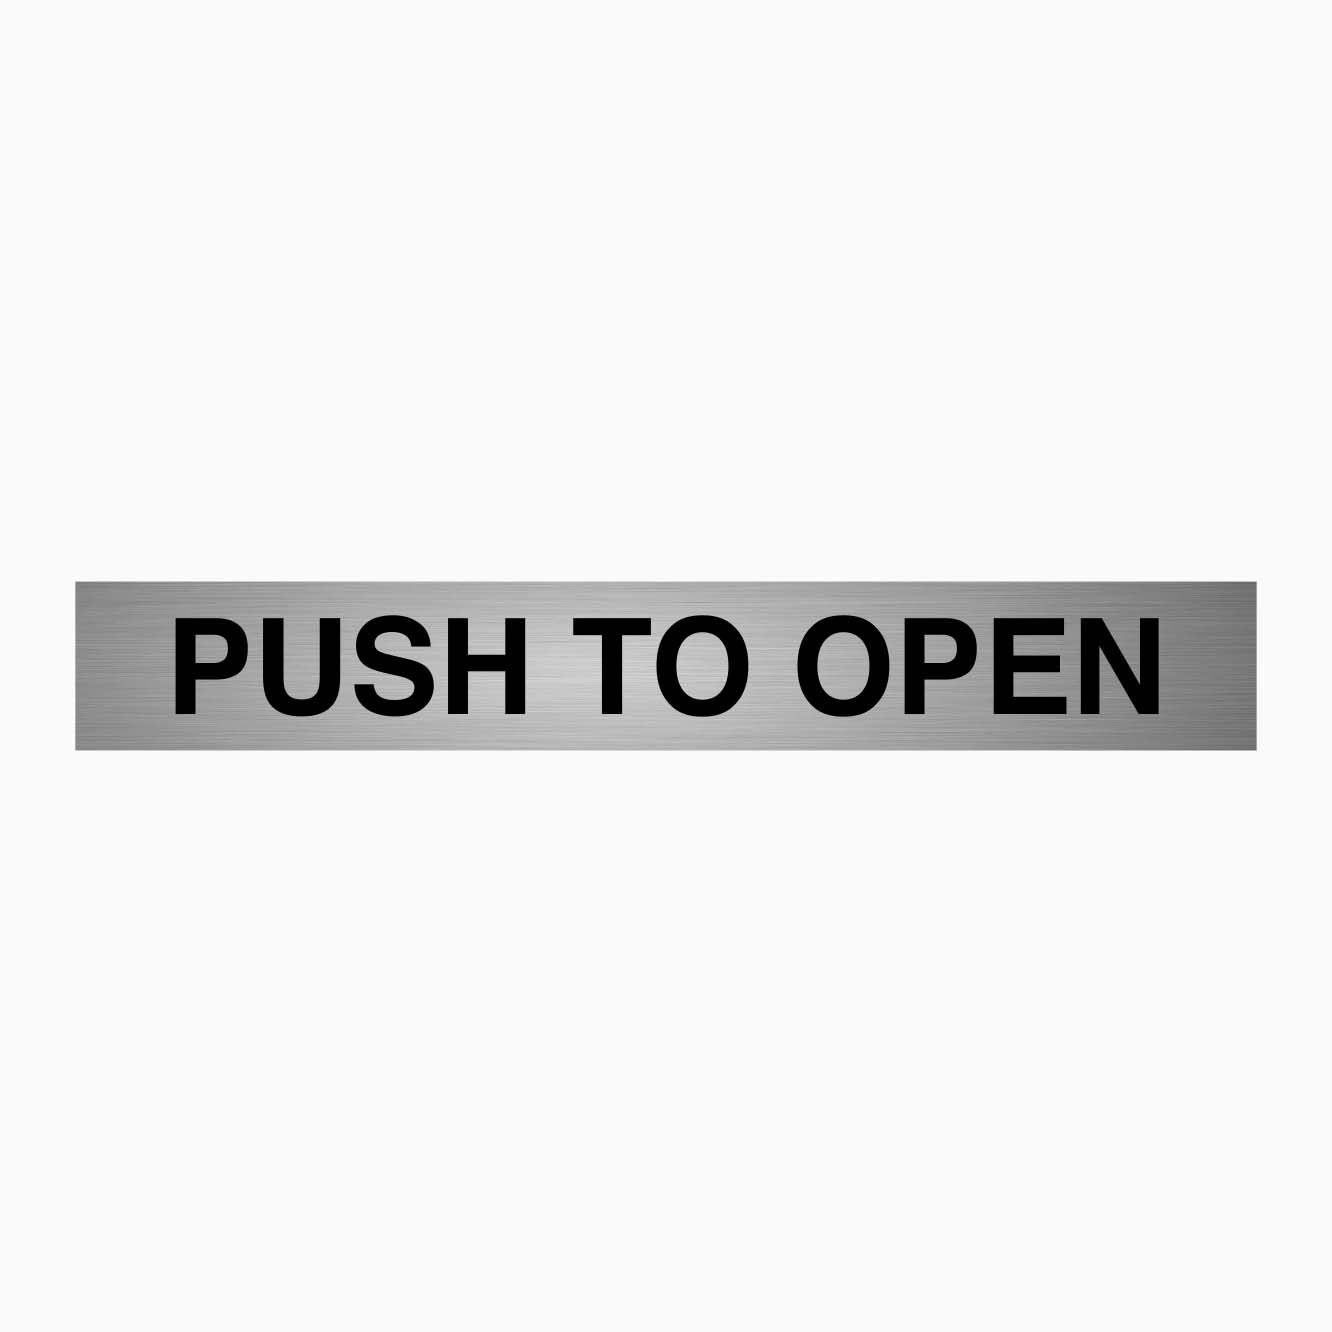 PUSH TO OPEN SIGN - SILVER BACKGROUND - GET SIGNS